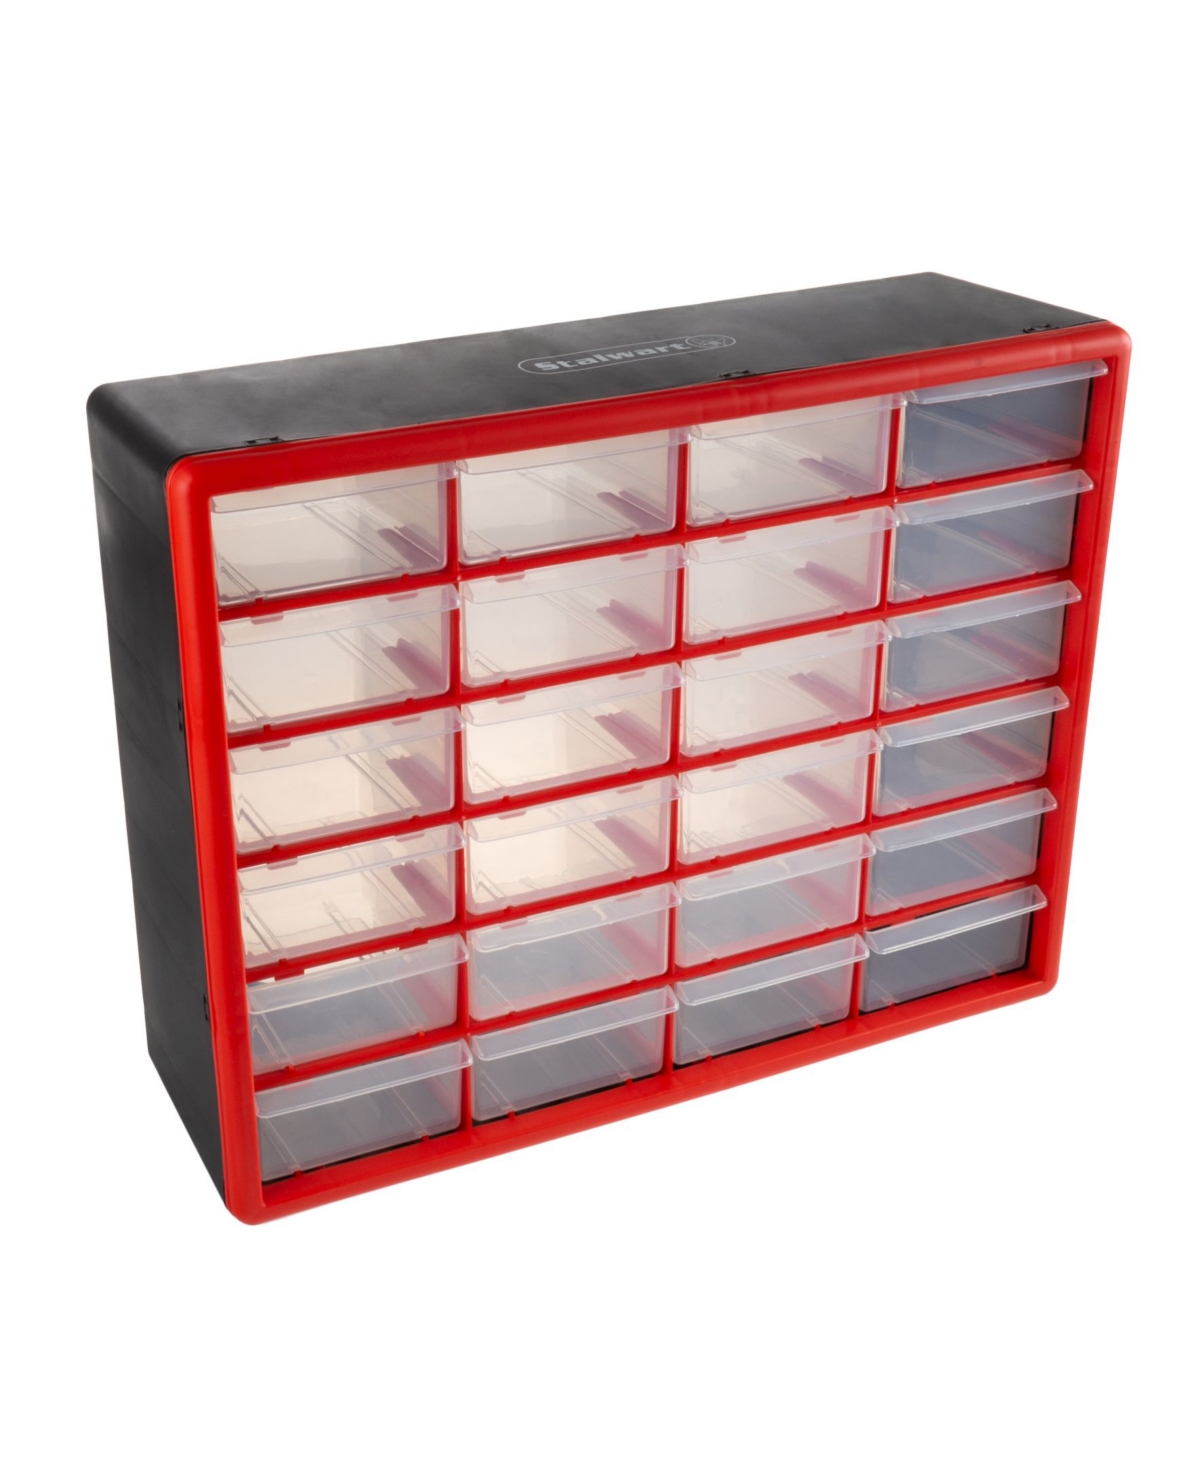 Storage Drawers - 24 Compartment organizer Desktop or Wall Mount Container - 24 Bins by Stalwart